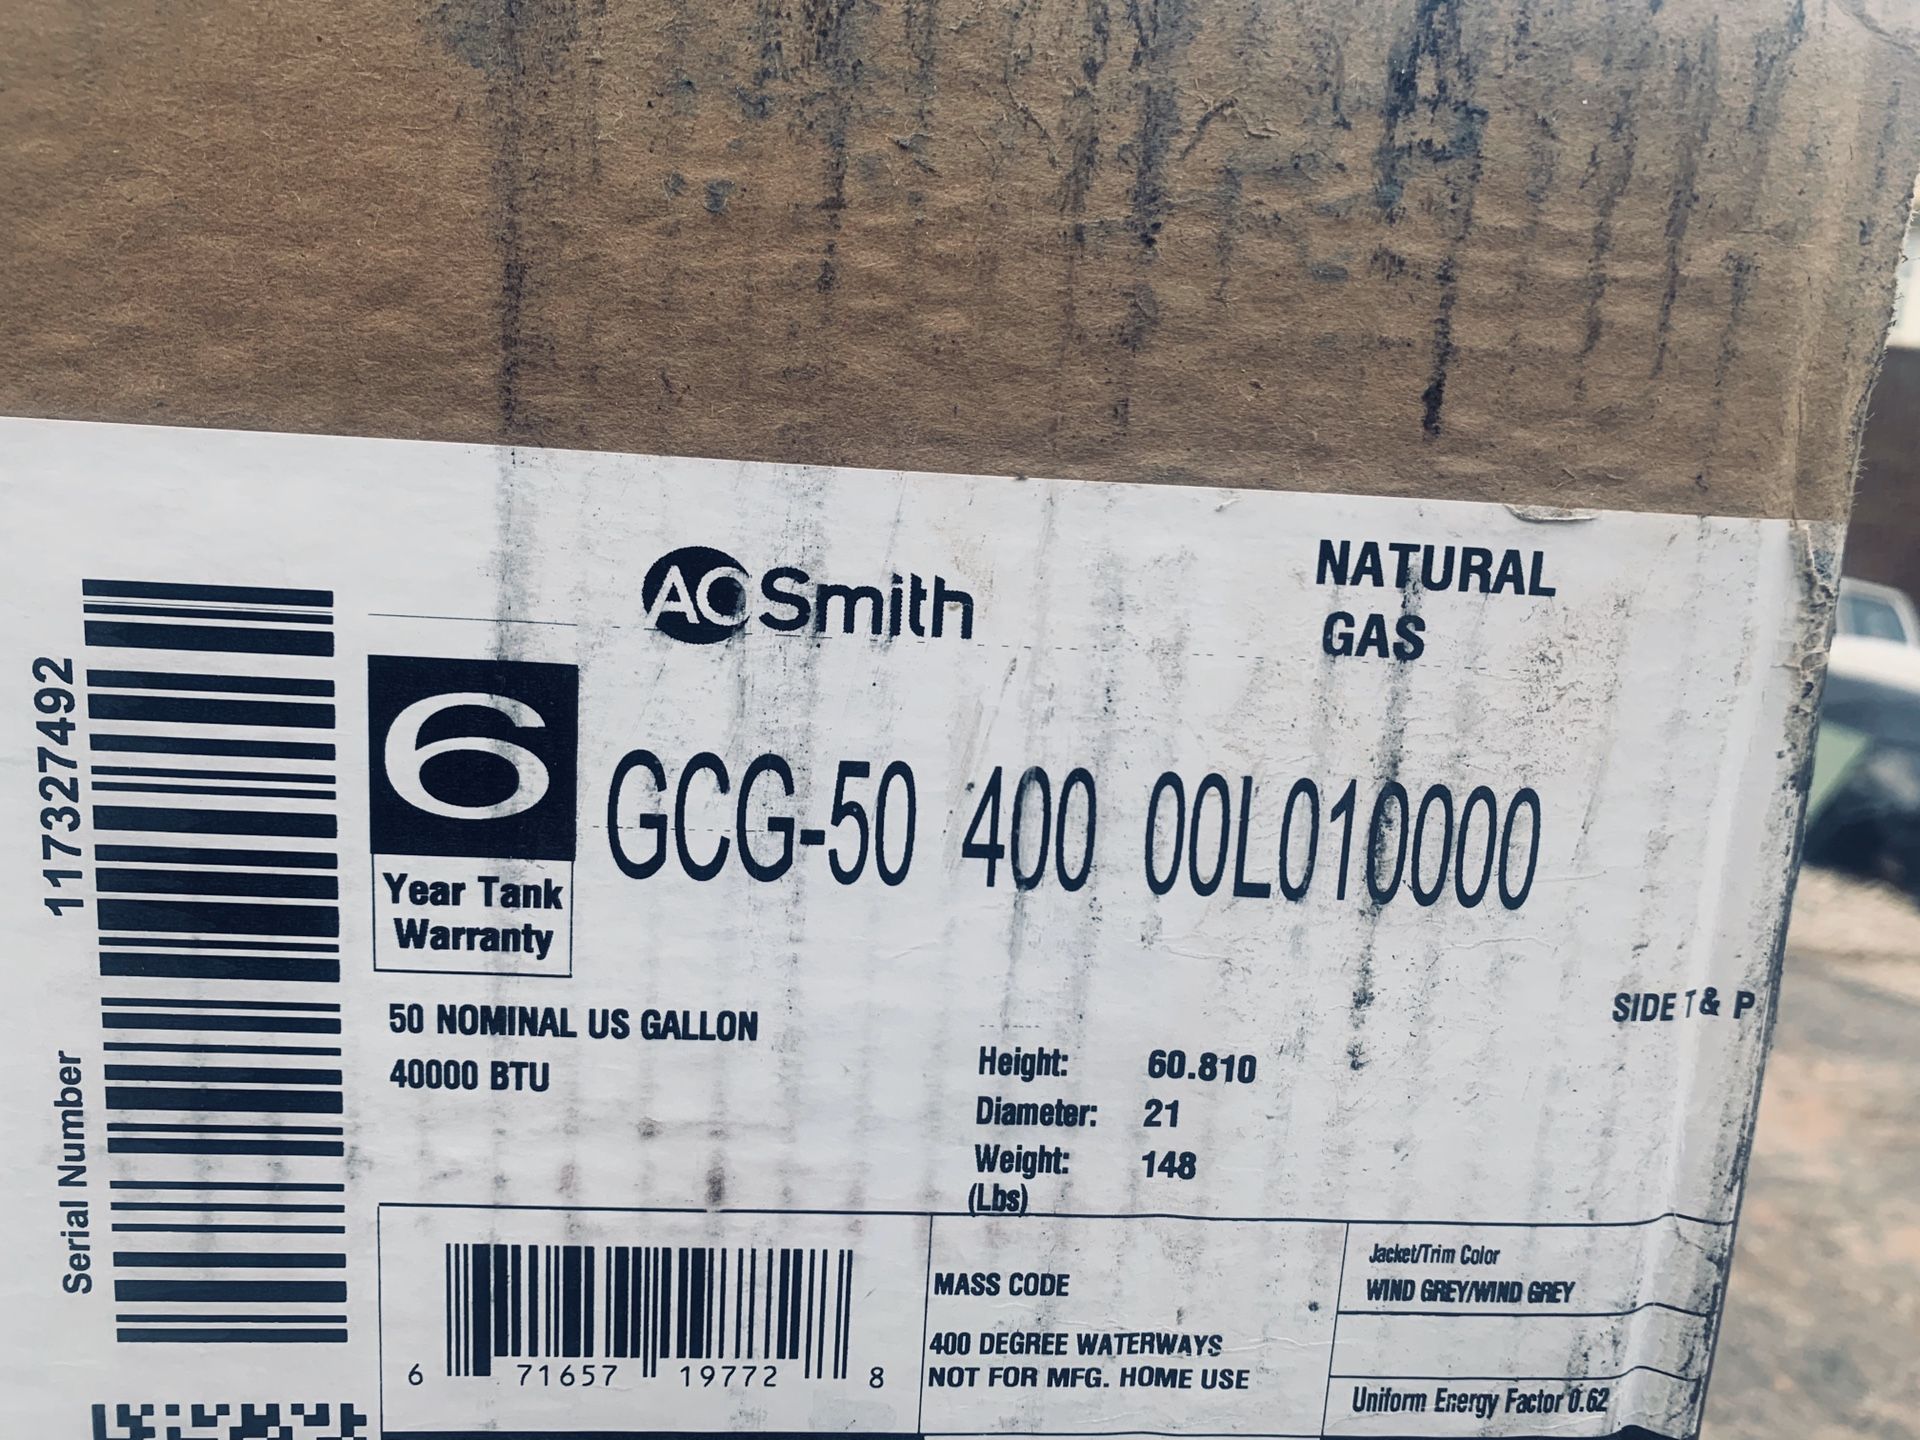 NEW WATER HEATER AOSMITH GAS 50 gallones